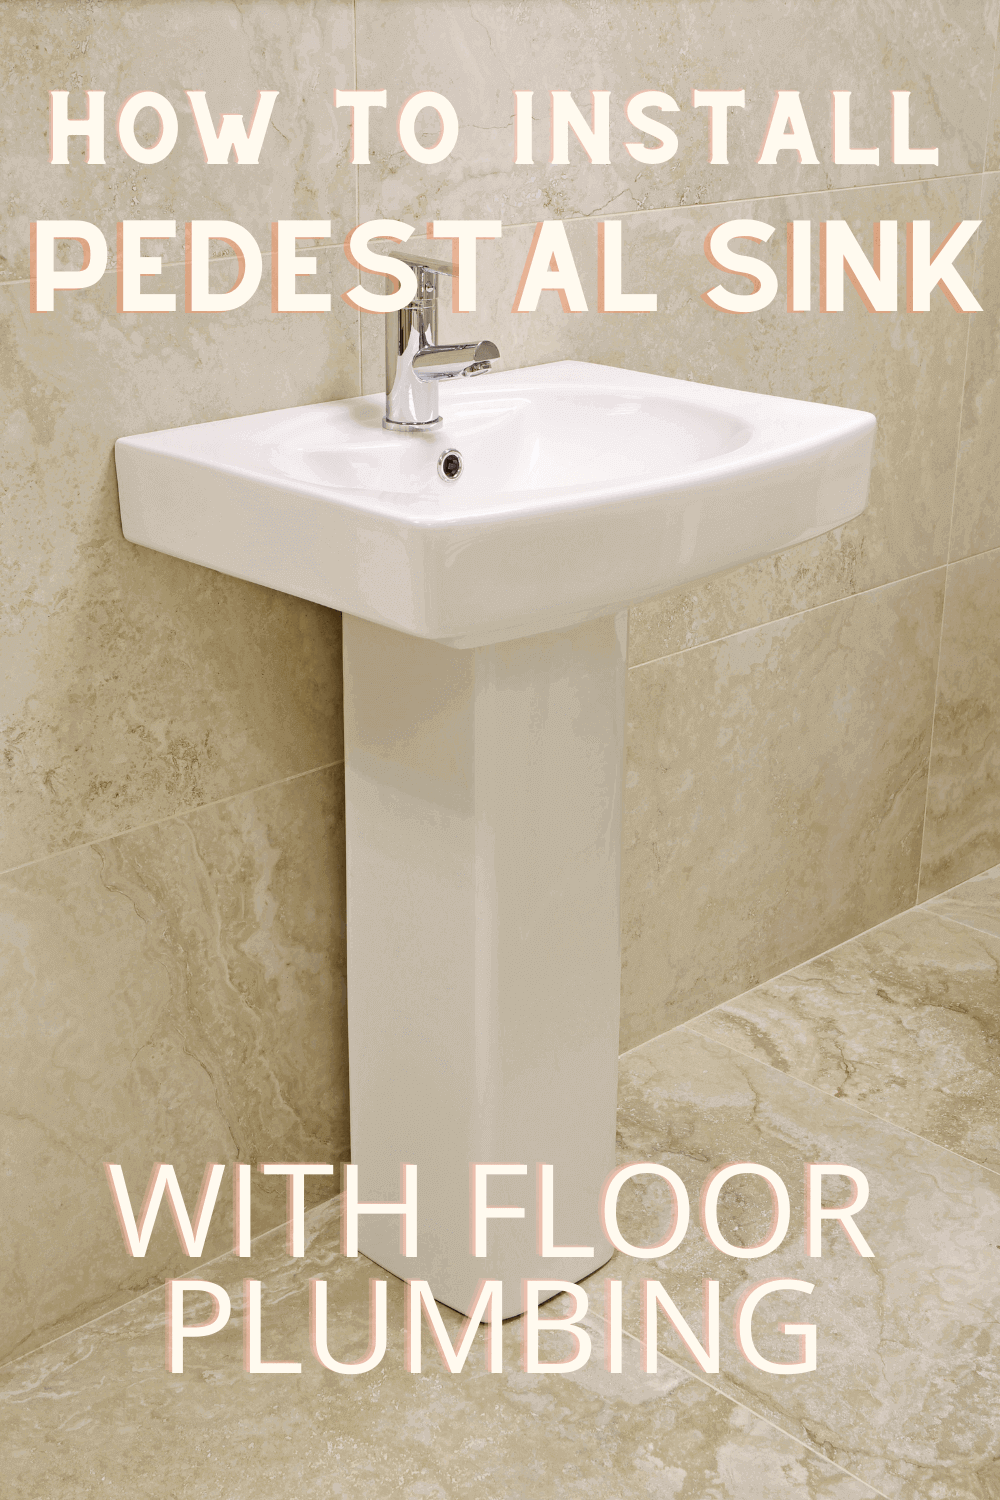 How to Install a Pedestal Sink with Floor Plumbing 1